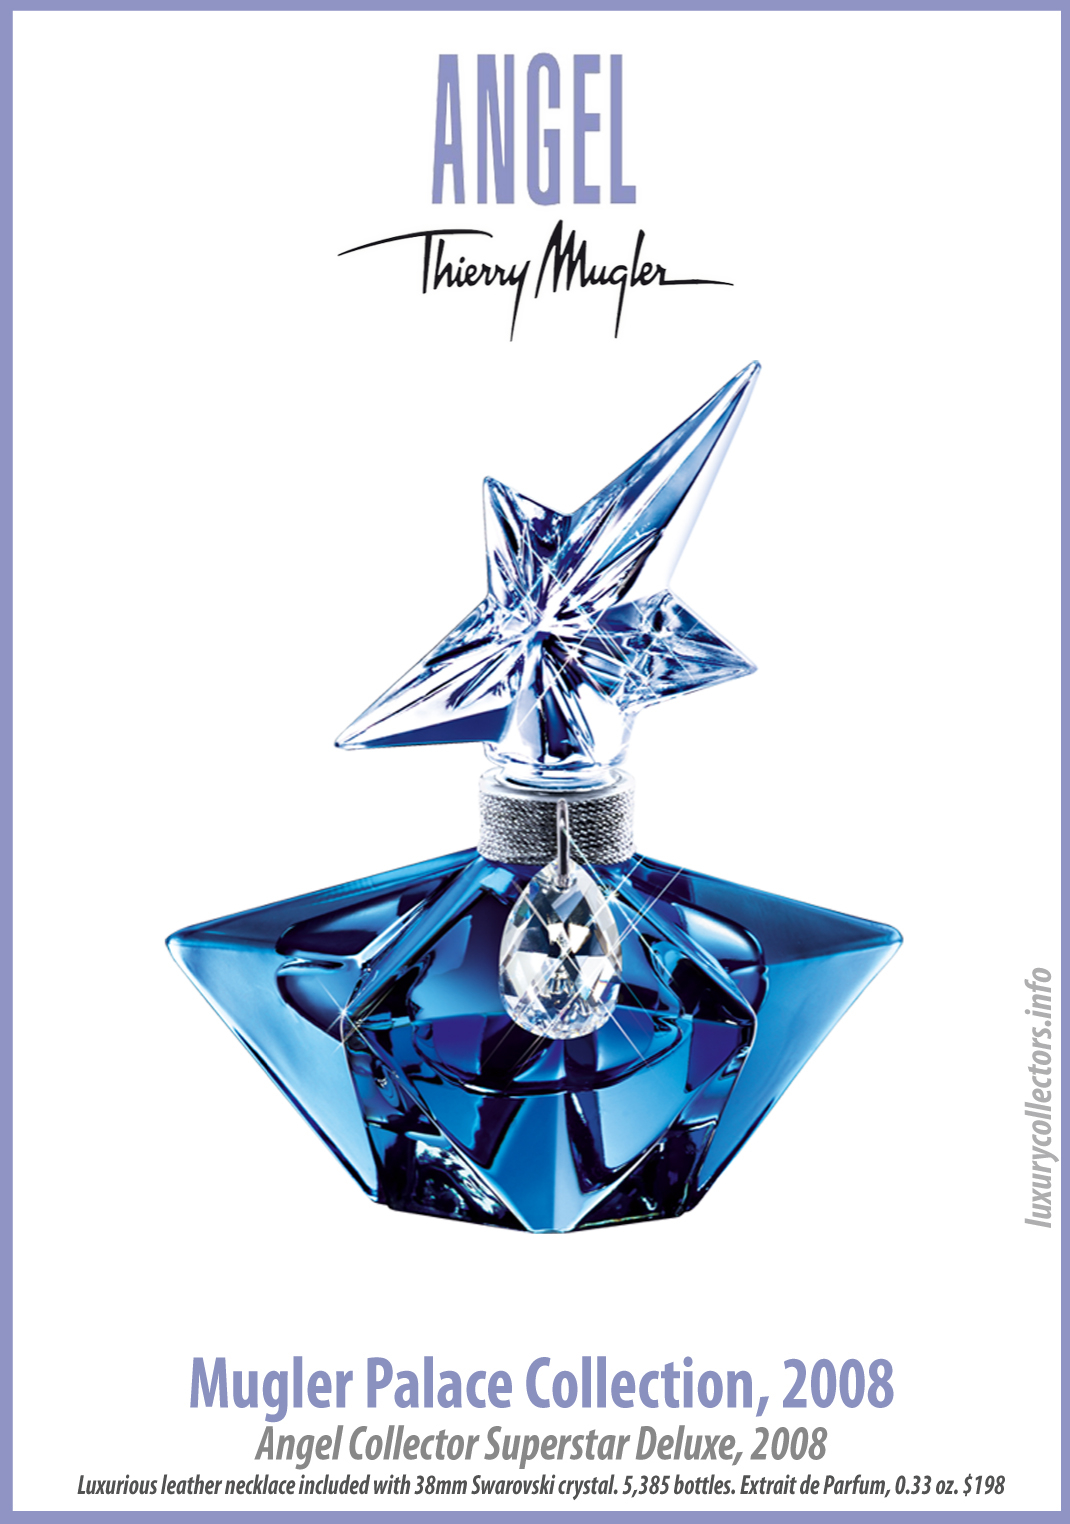 Thierry Mugler Angel 20 Years Perfume Collector's Limited Edition Bottle 2008 Superstar Deluxe Palace Collection Extrait de Parfum 2009